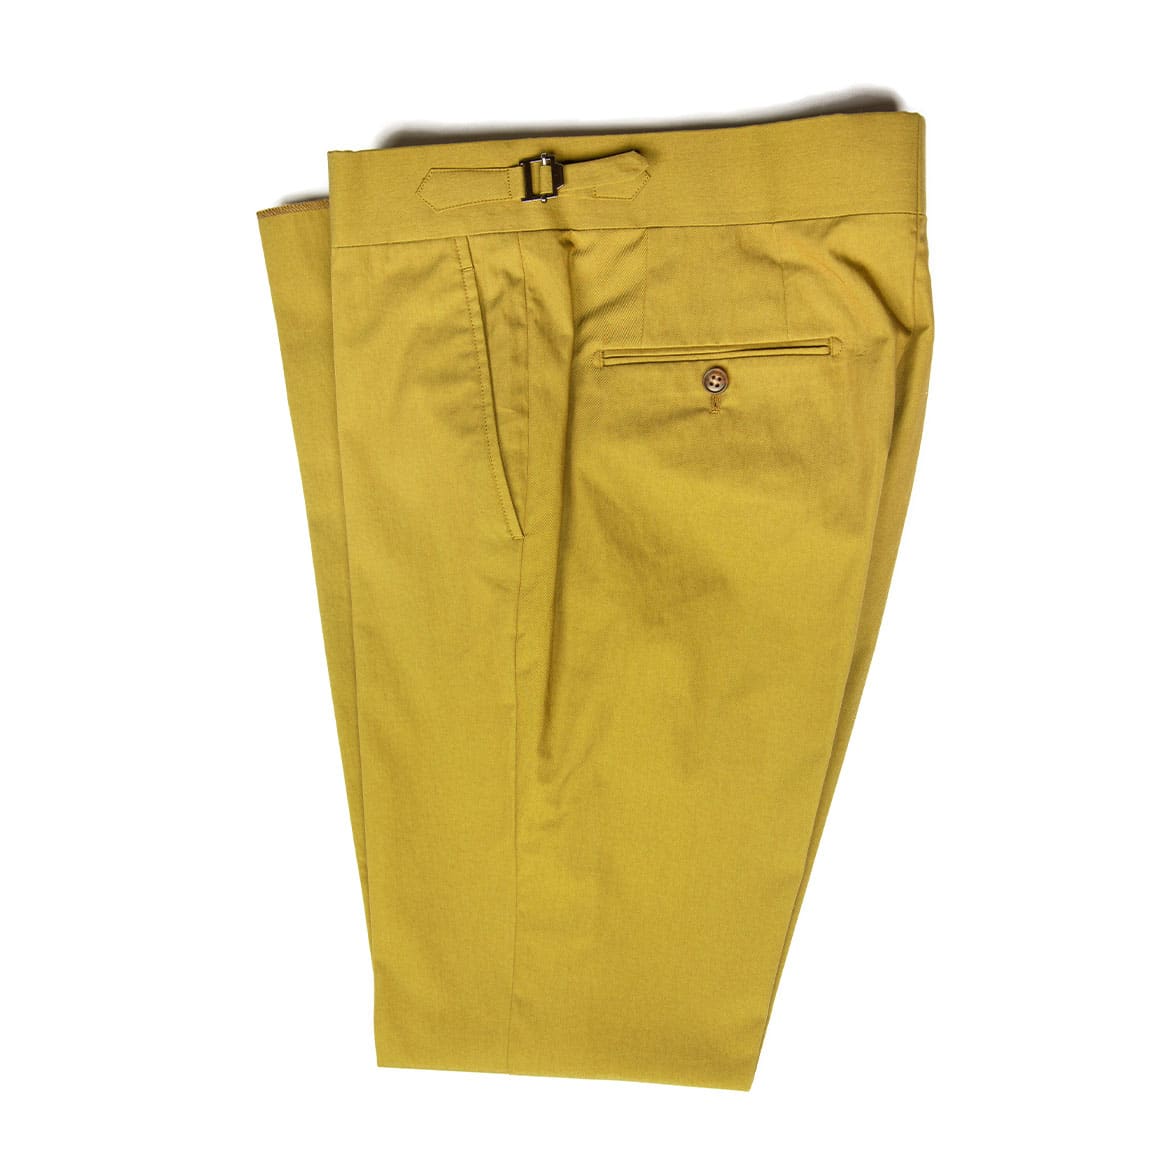 The Revivifier Trousers